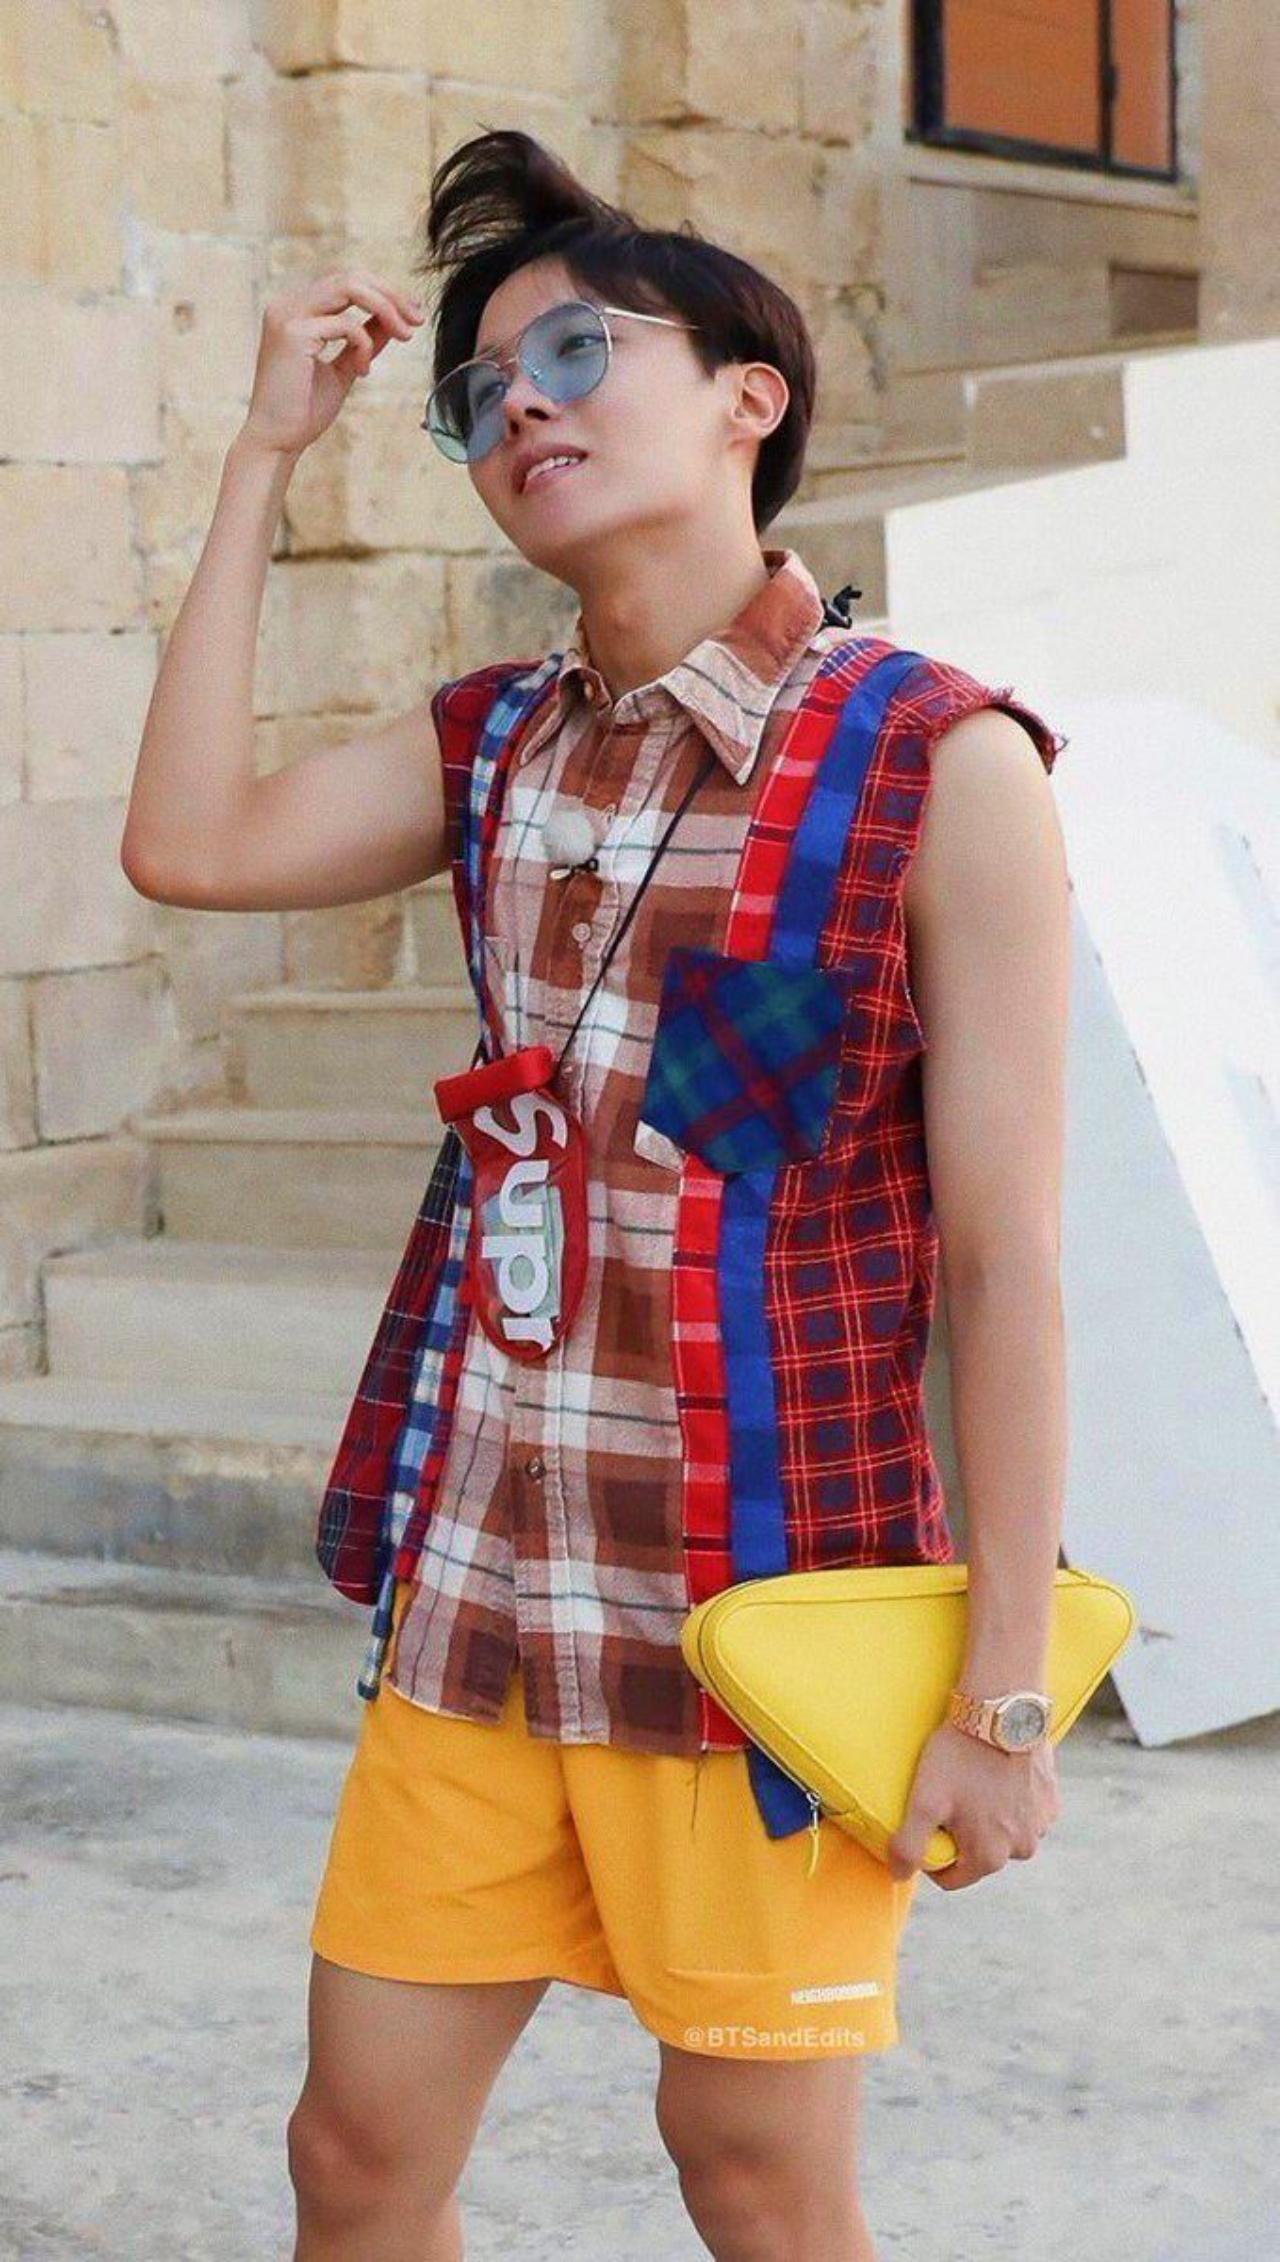 Fans loved this look of the artist in Malta. J-Hope is dressed in a distressed-style checkered vest and yellow shorts - an outfit that perfectly describes J-Hope's eclectic and unique sense of style